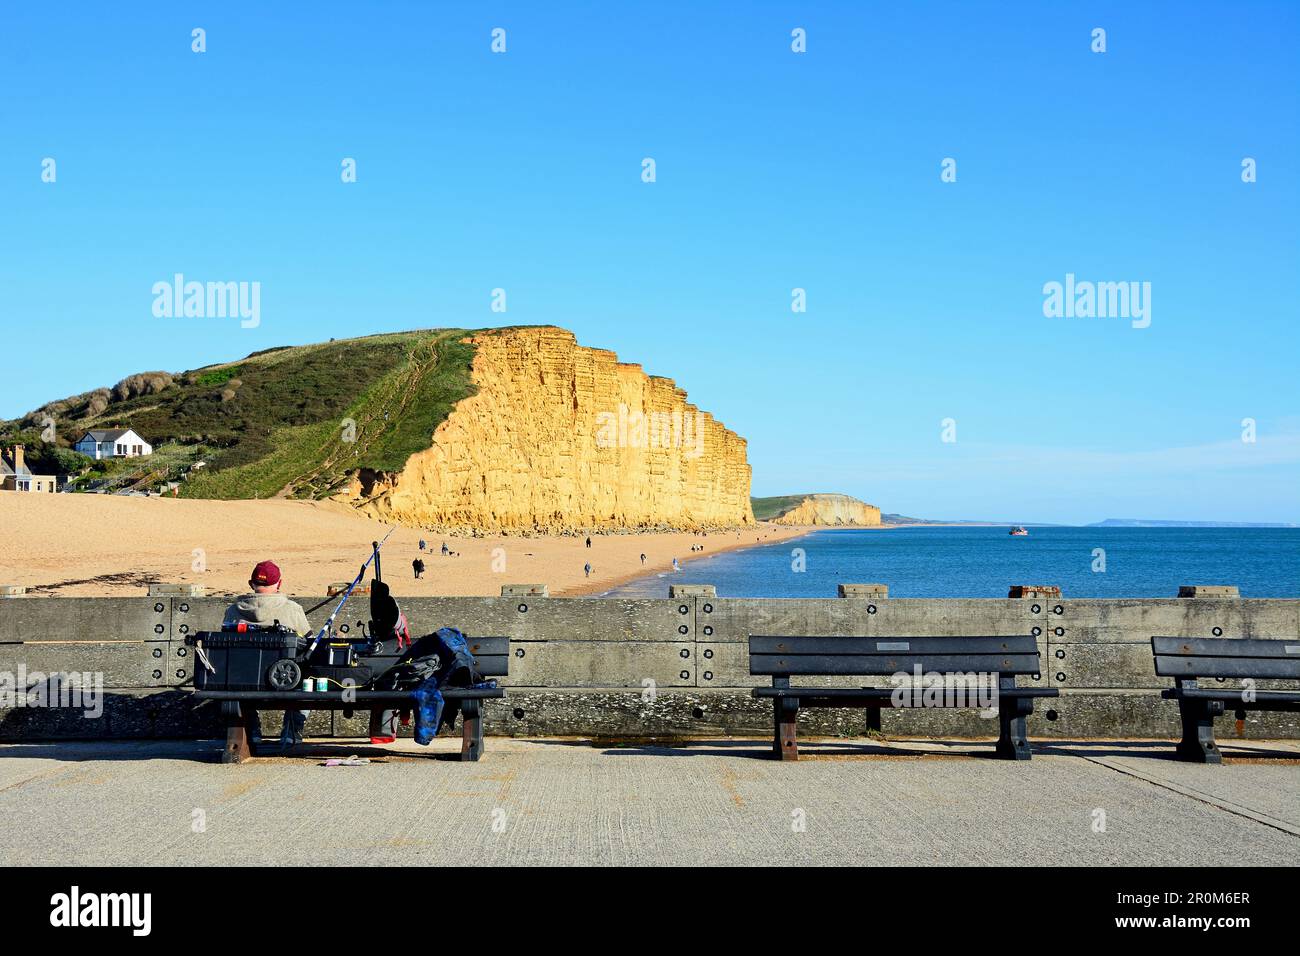 Fisherman sitting on a bench along the pier with views towards the Jurassic Coast cliffs, West Bay, Dorset, UK, Europe. Stock Photo